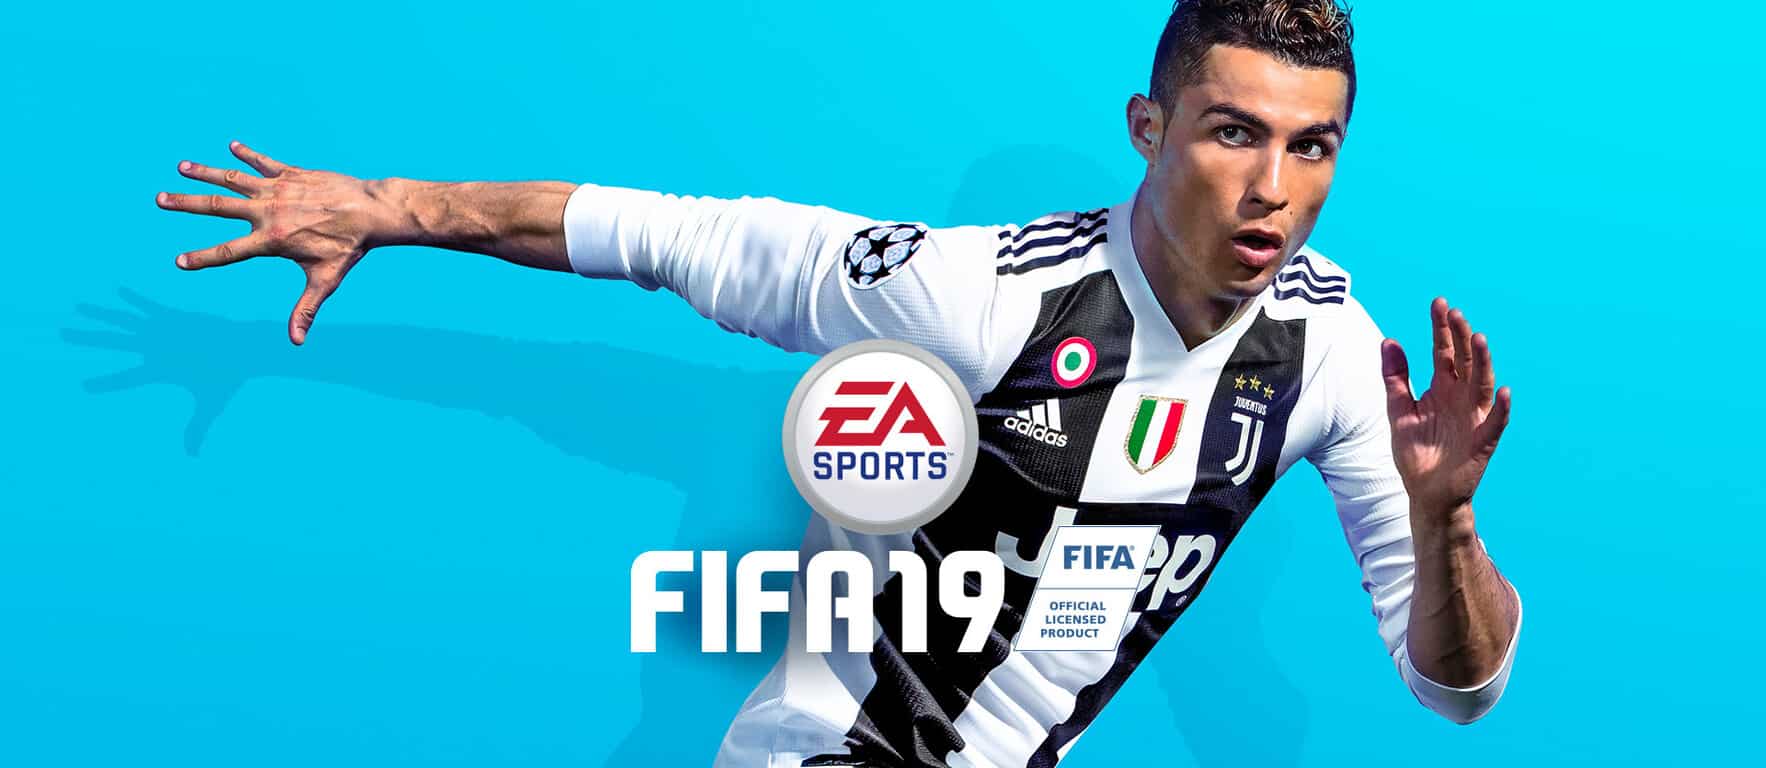 Xbox Digital Games on sale this week on the Microsoft Store, save up to 60% on FIFA 19 - OnMSFT.com - May 29, 2019